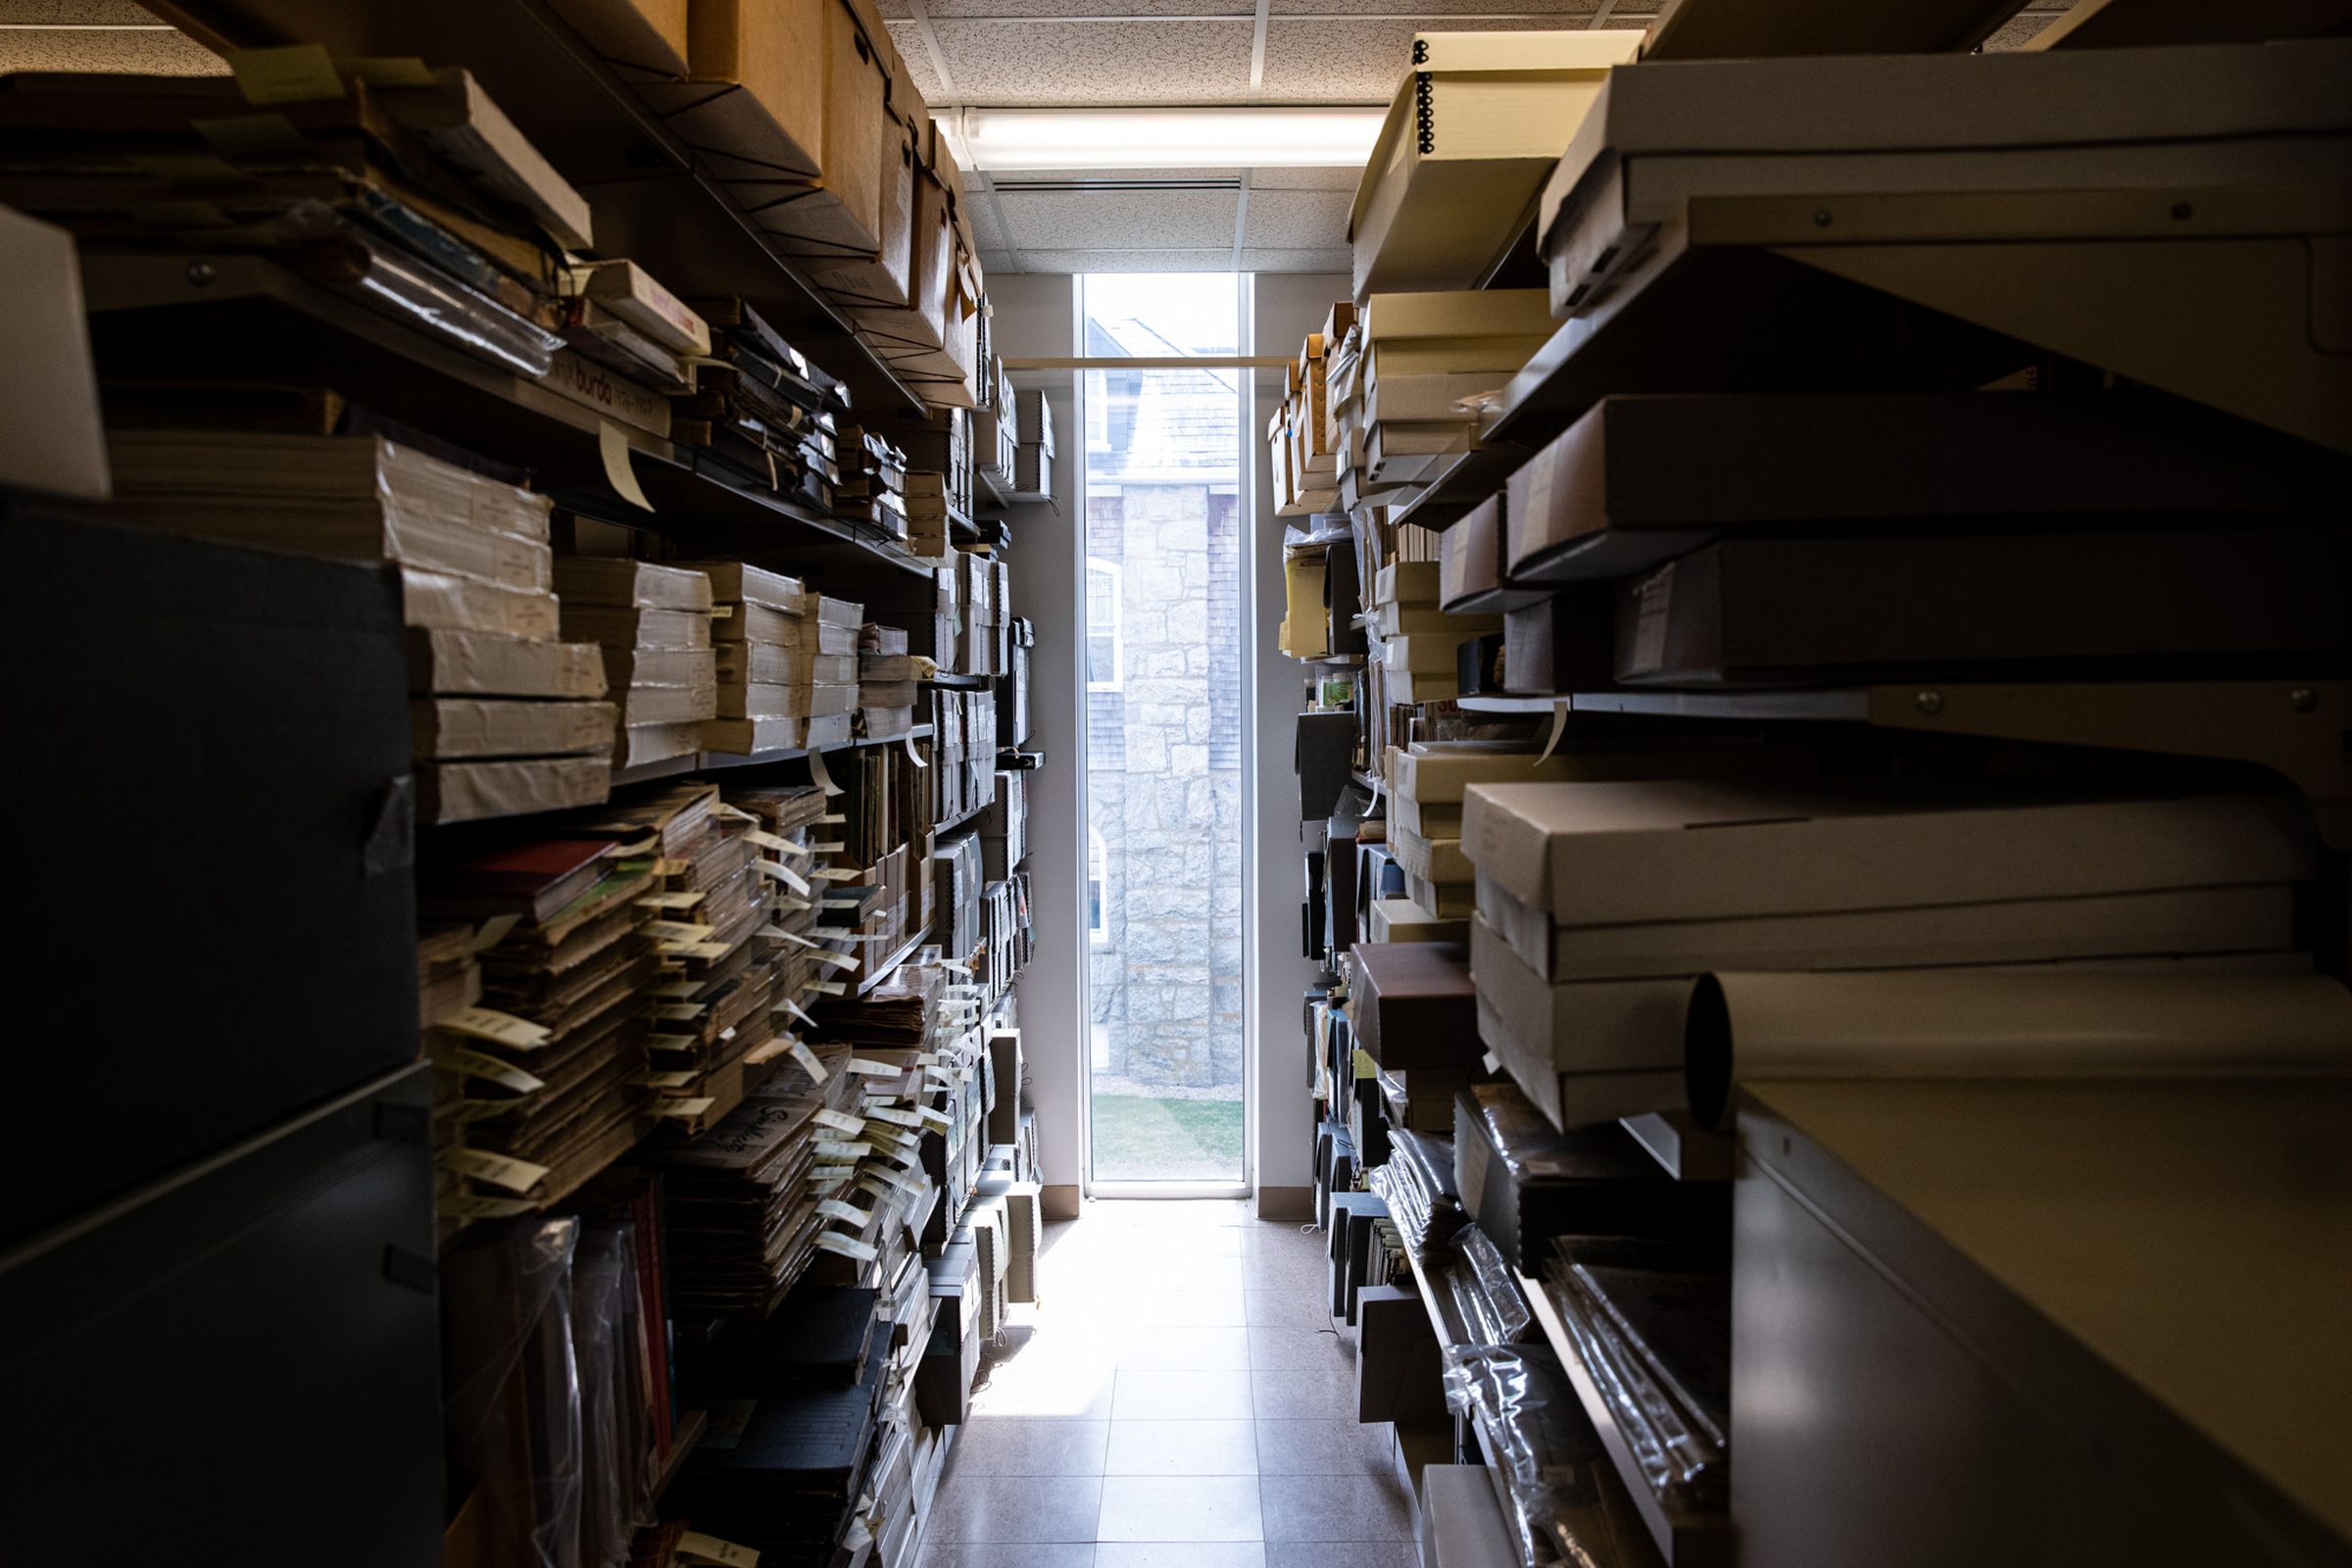 The Consumer Pattern Archive housed in Carothers Library at the University of Rhode Island. The largest of it’s kind in the world, it contains over 60,000 patterns dating from 1847. Kingston, Rhode Island on April 21st 2022.